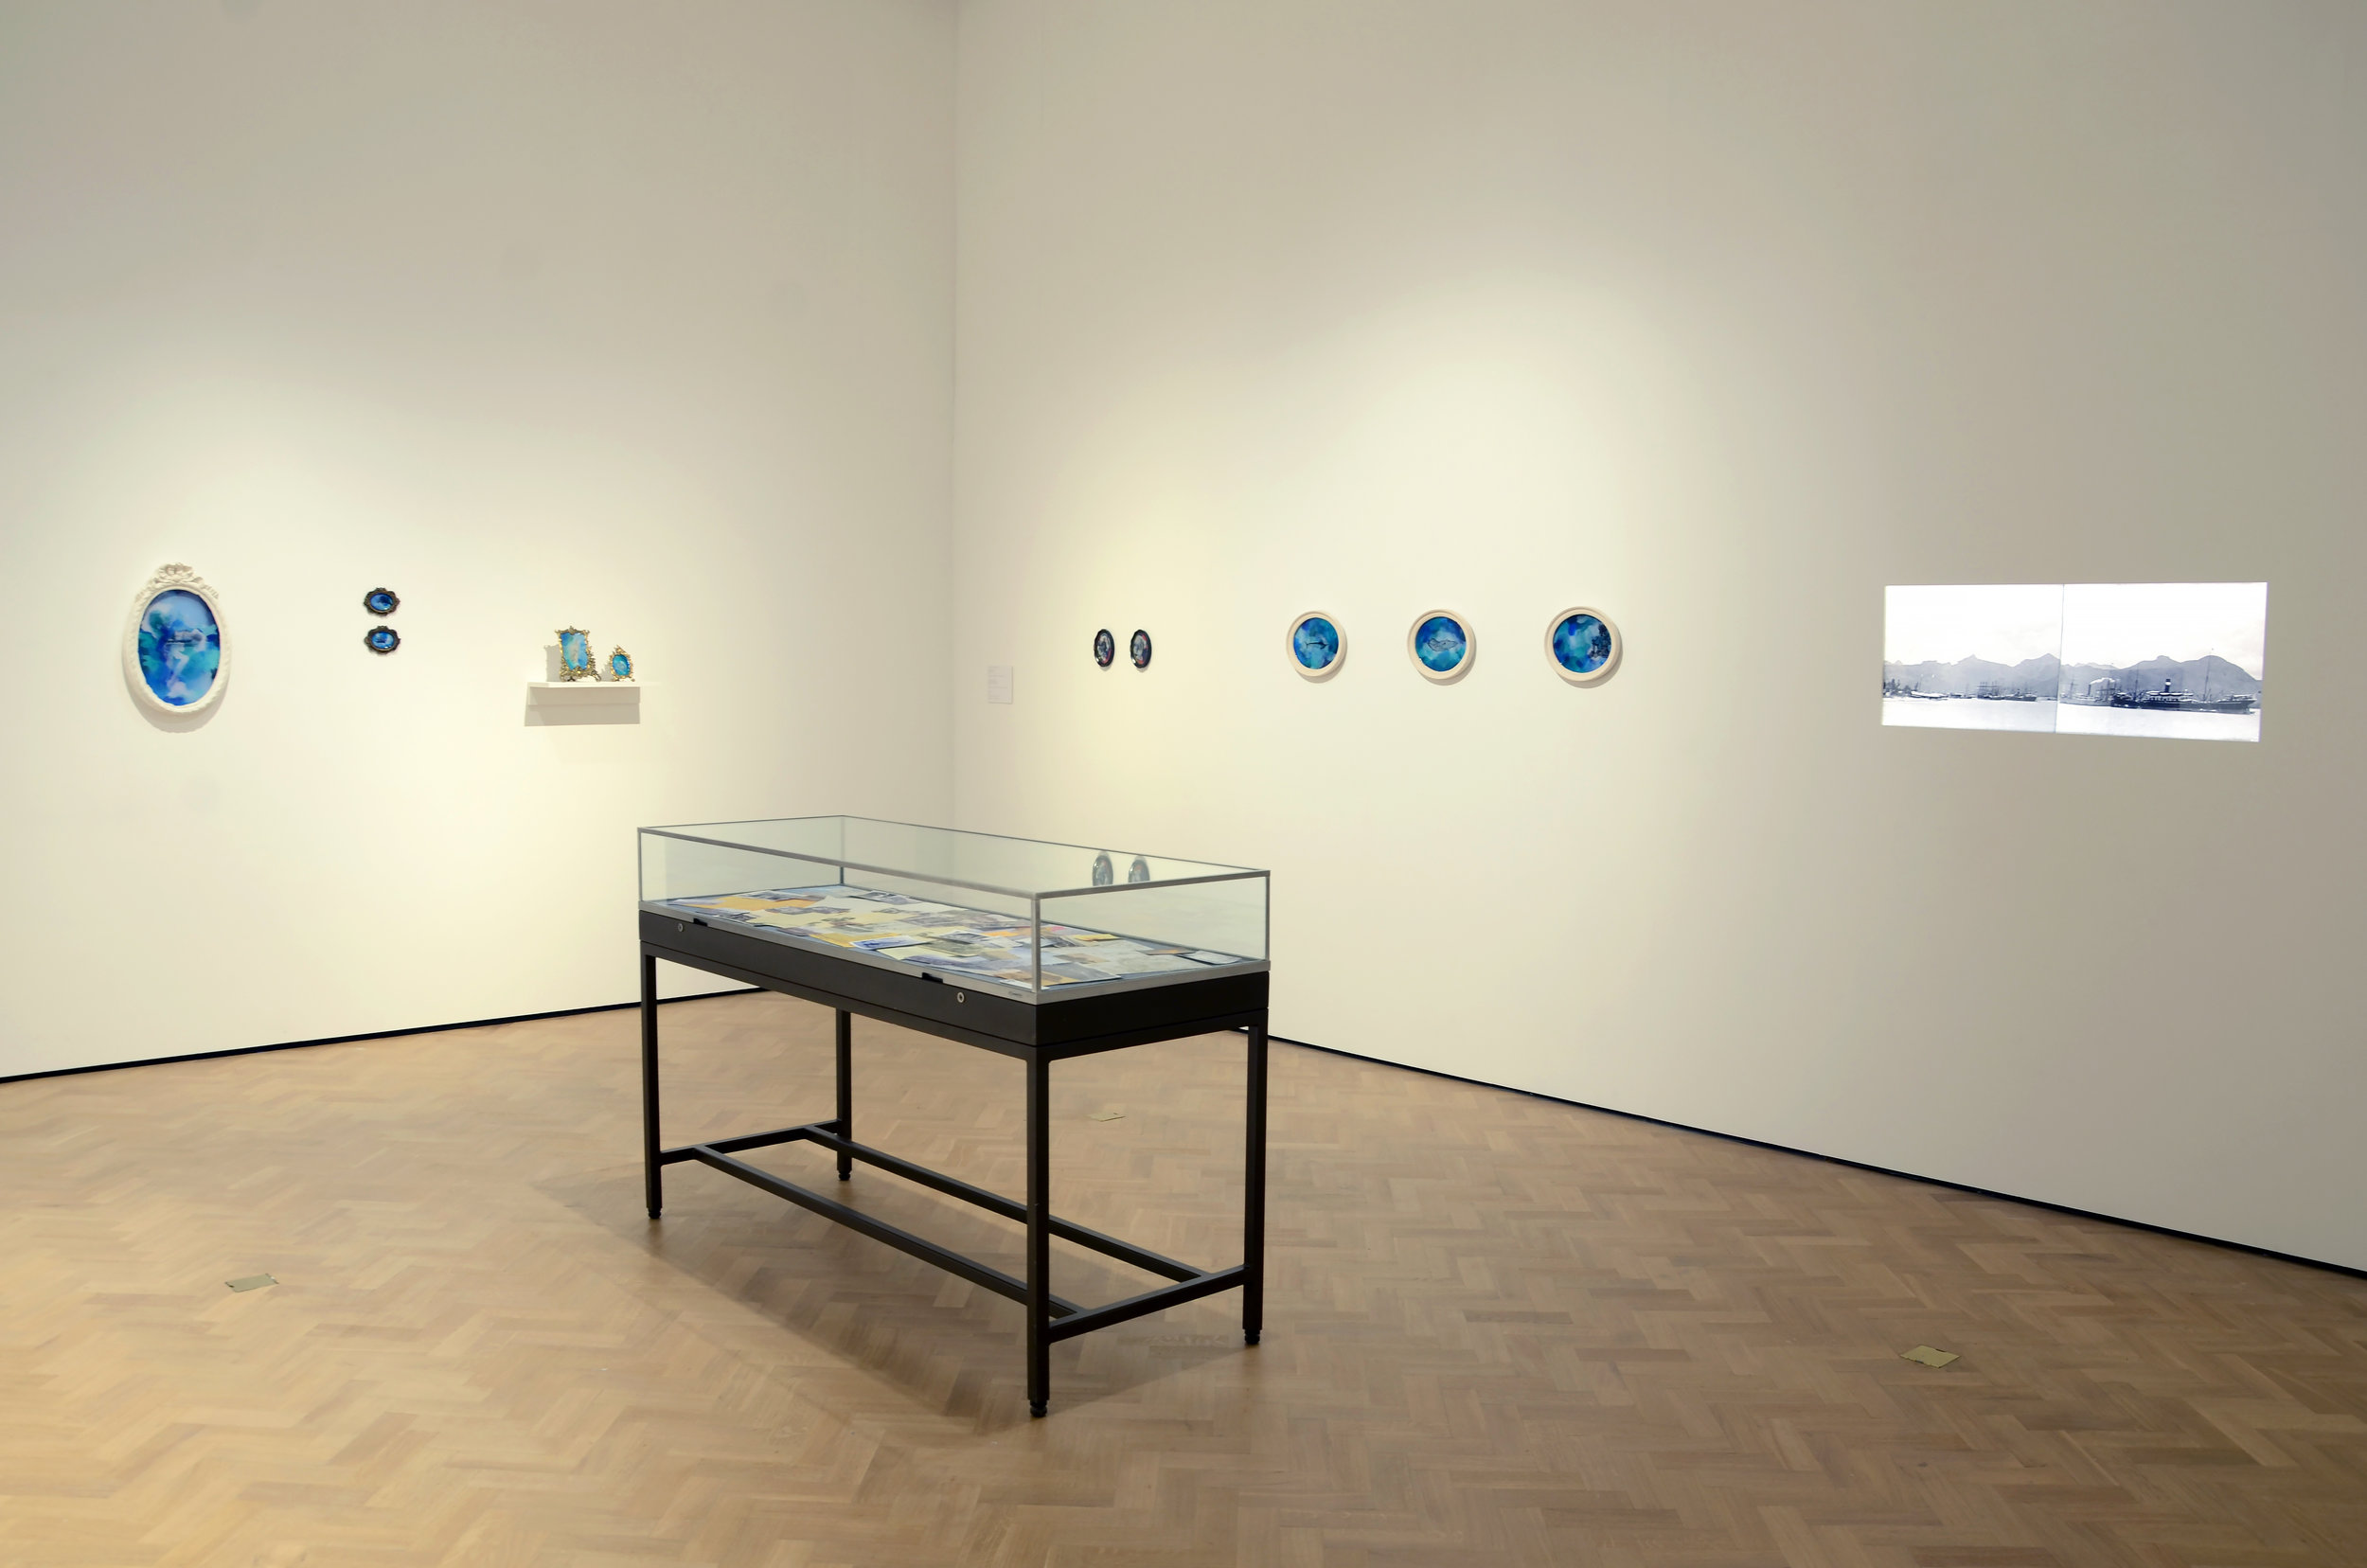  Shiraz Bayjoo  Installation view   These Waters Have Stories To Tell   Glynn Vivian Art Gallery, Swansea, UK  2018    